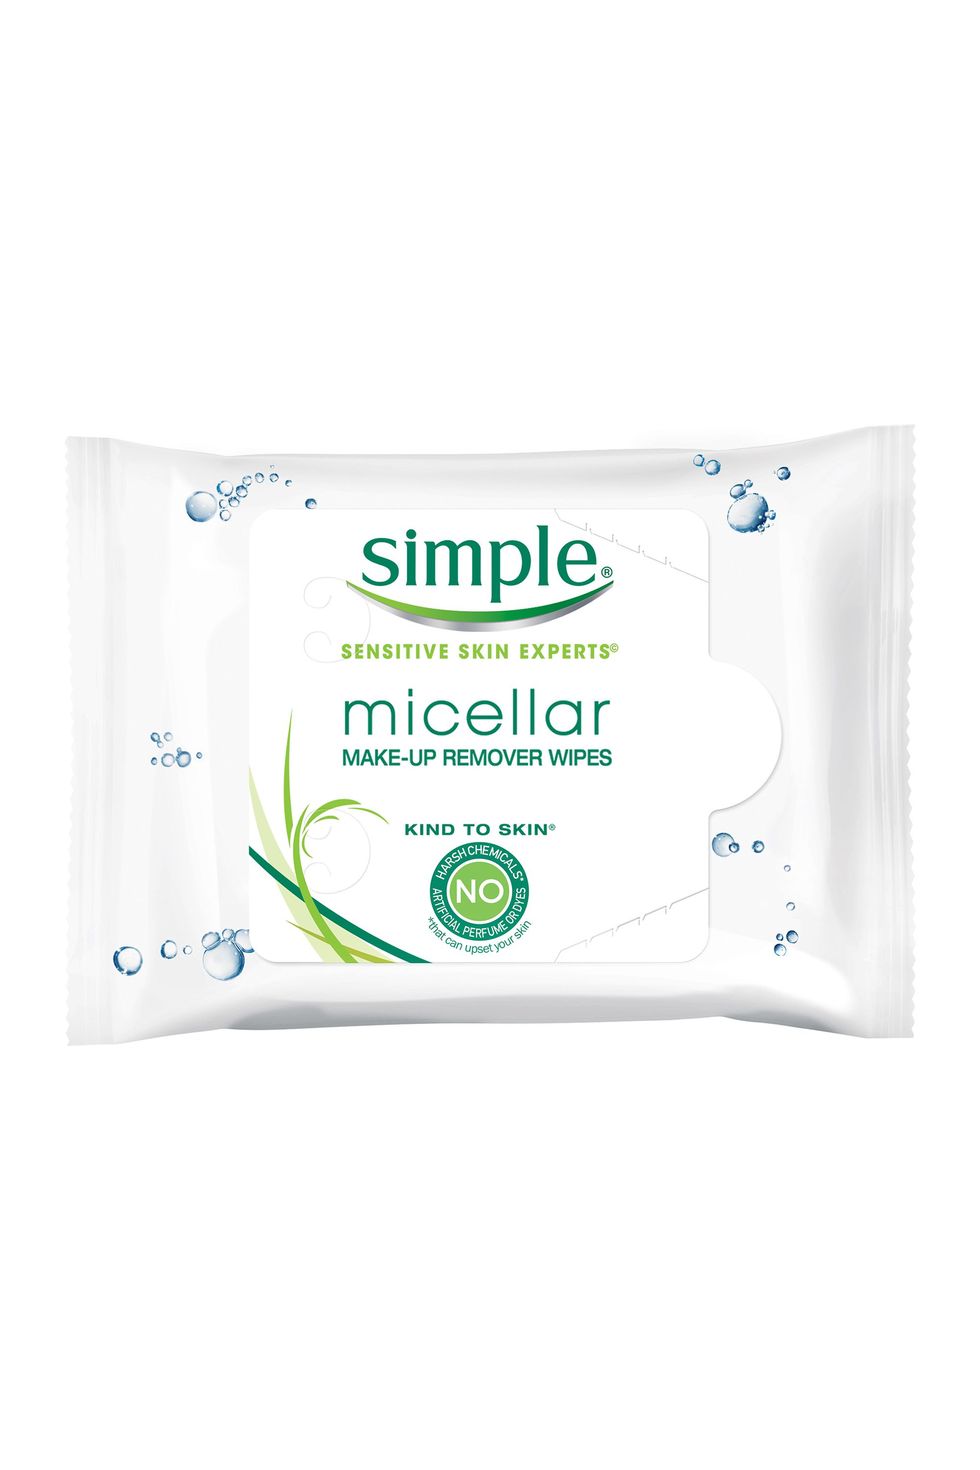 Micellar Makeup Remover Wipes